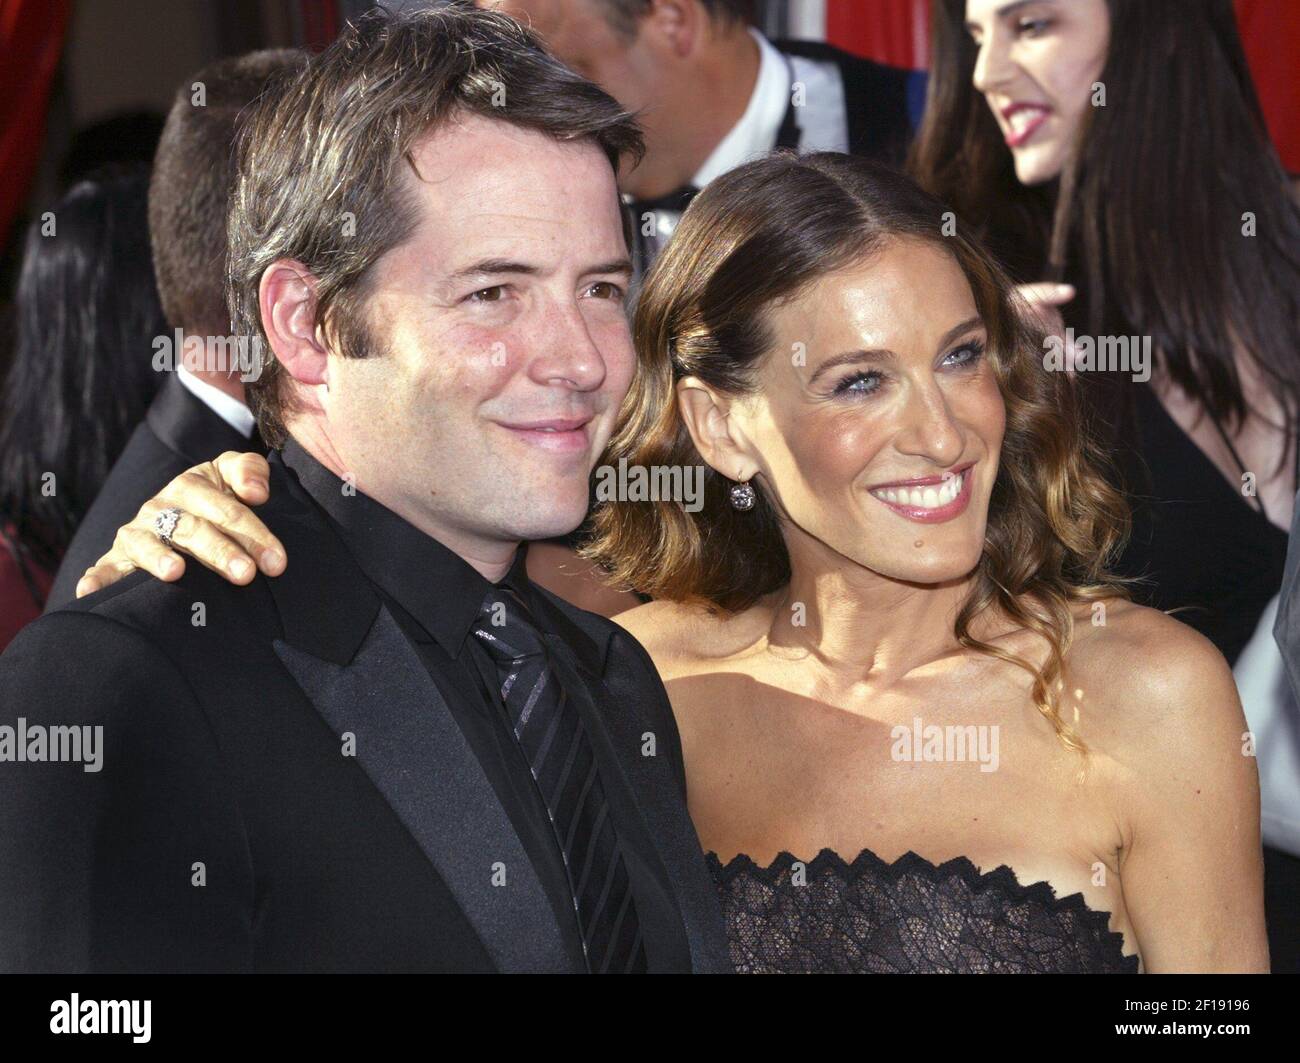 -- NO MAGS, NO SALES -- KRT ENTERTAINMENT STORY SLUGGED: TV-EMMYS KRT PHOTOGRAPH BY KEVIN SULLIVAN/ORANGE COUNTY REGISTER (L.A. TIMES OUT) (September 19) LOS ANGELES, CA -- Matthew Broderick and Sarah Jessica Parker arrive for the Emmy Awards at the Shrine Auditorium in Los Angeles, California, on Sunday, September 19, 2004. (Photo by cdm) 2004 Stock Photo